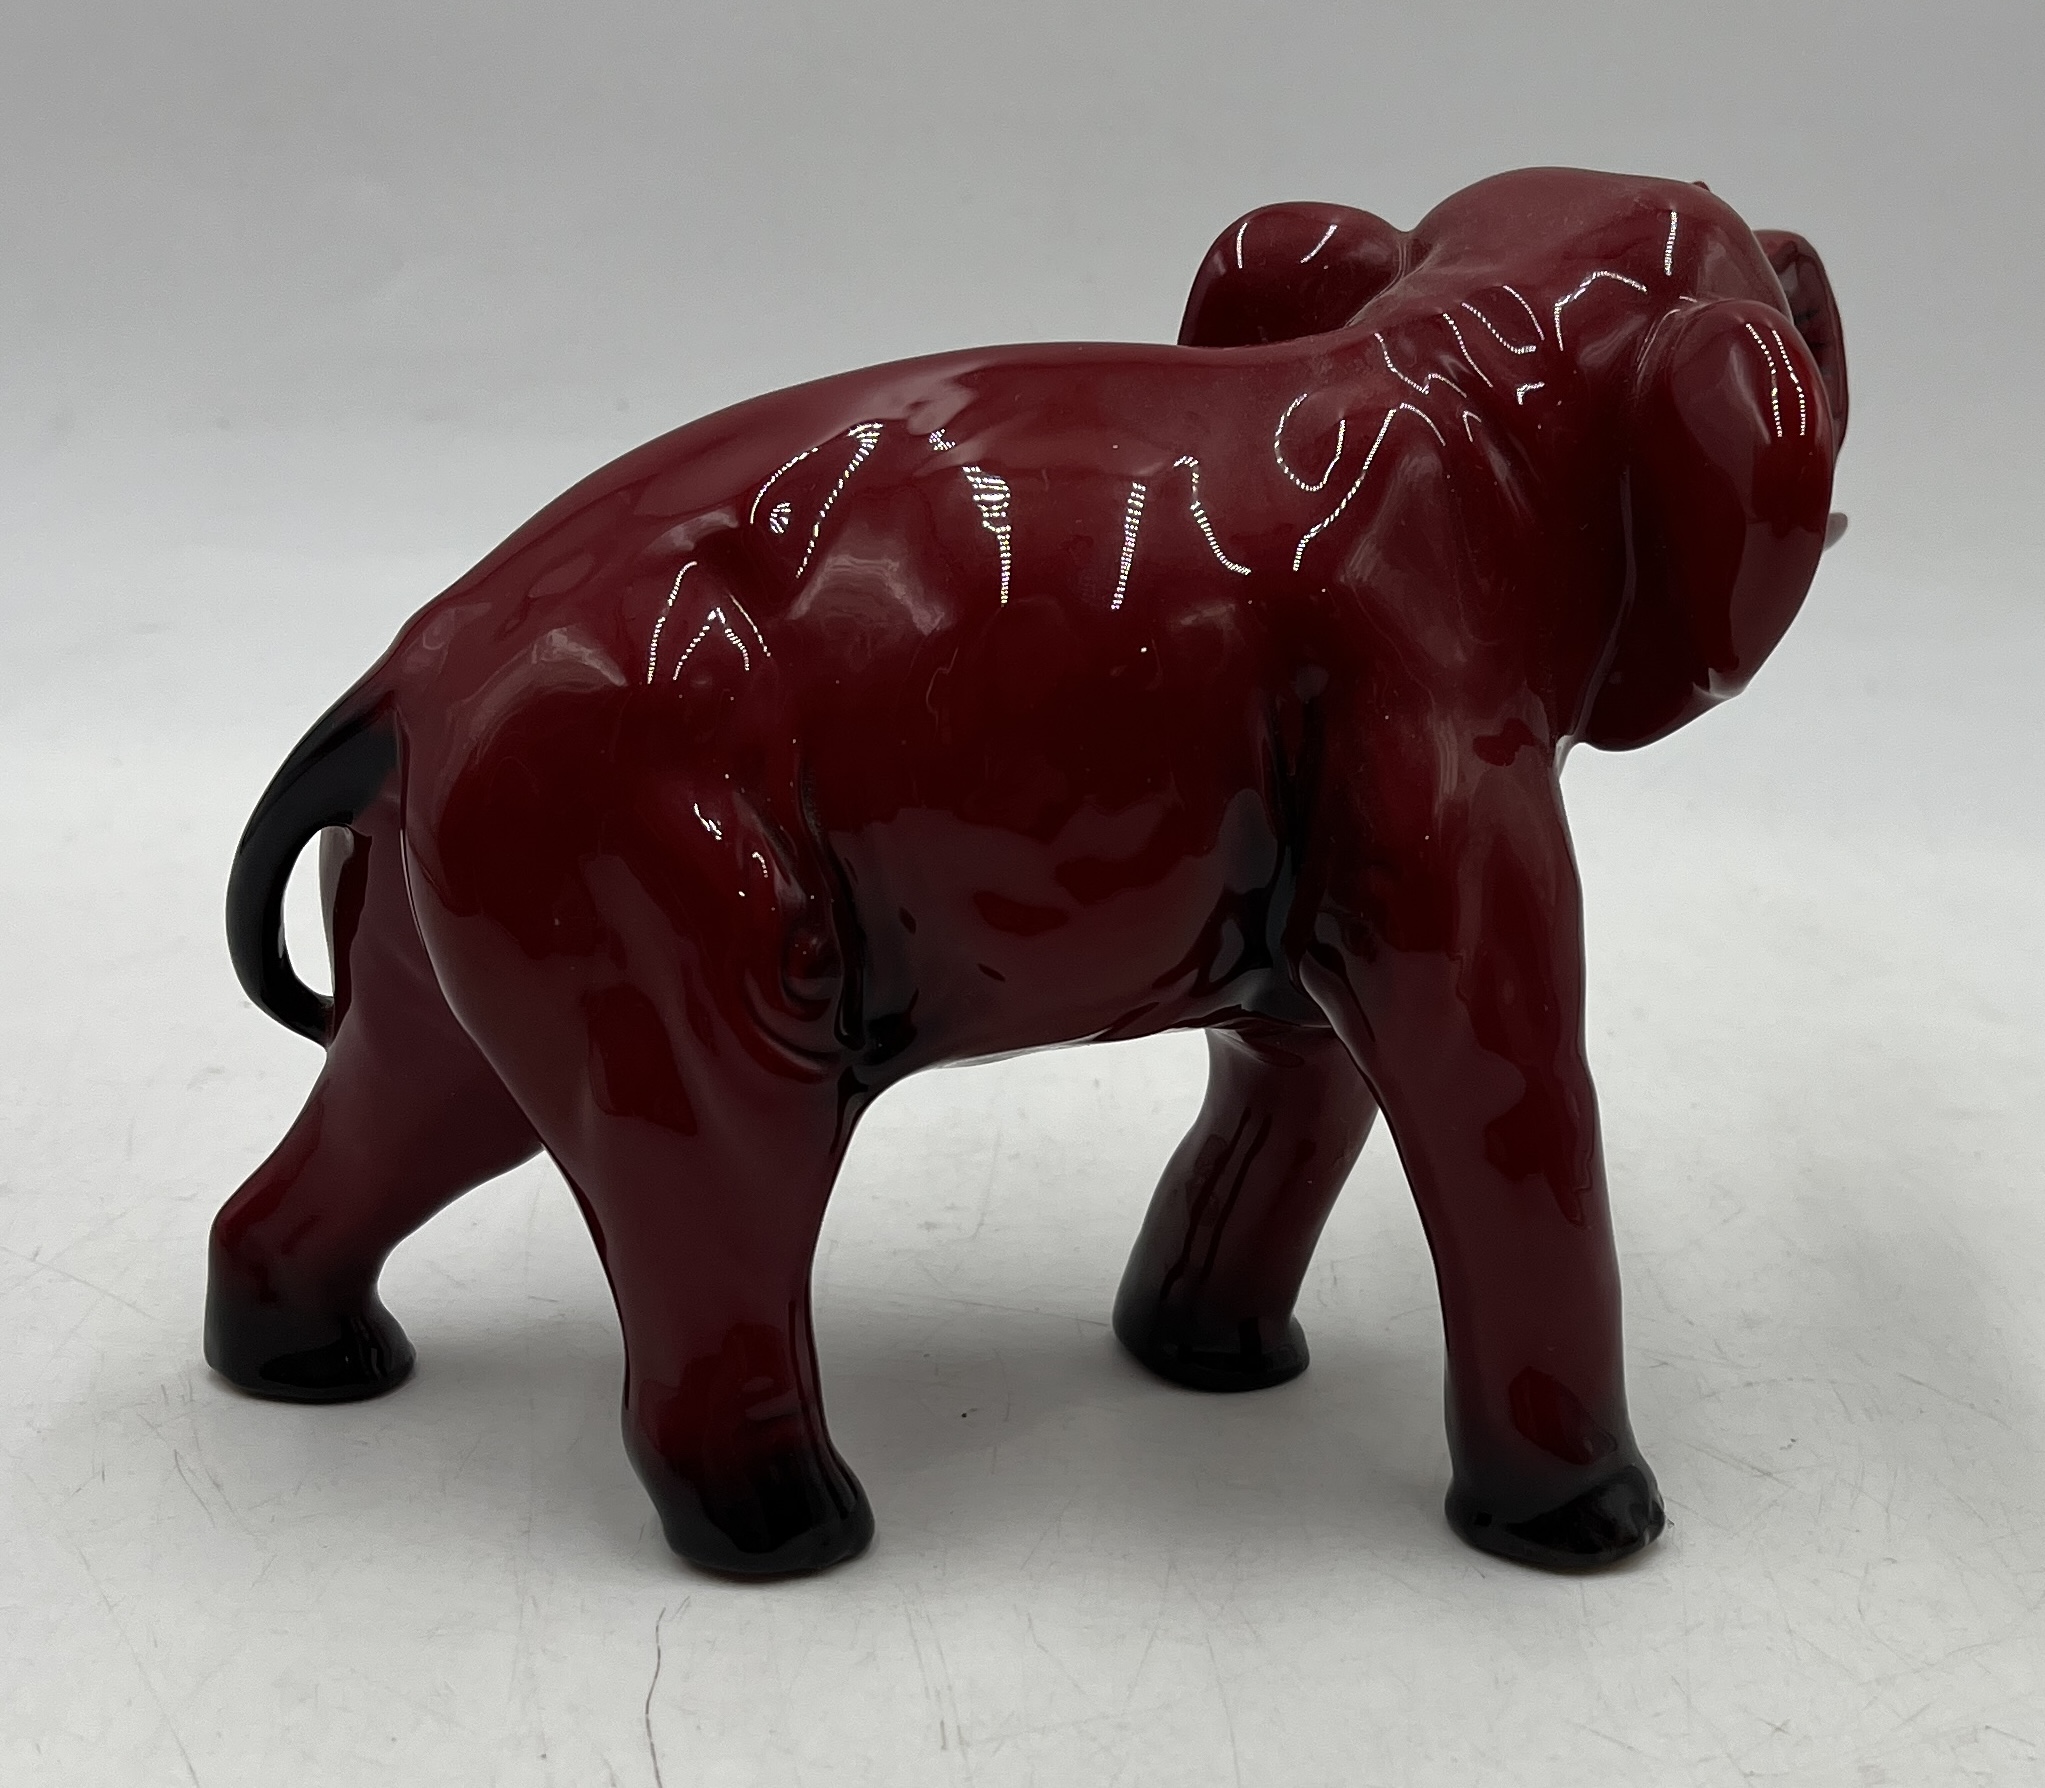 A Royal Doulton Flambe elephant with raised trunk signed by Michael Doulton in gold to the base - Image 3 of 4